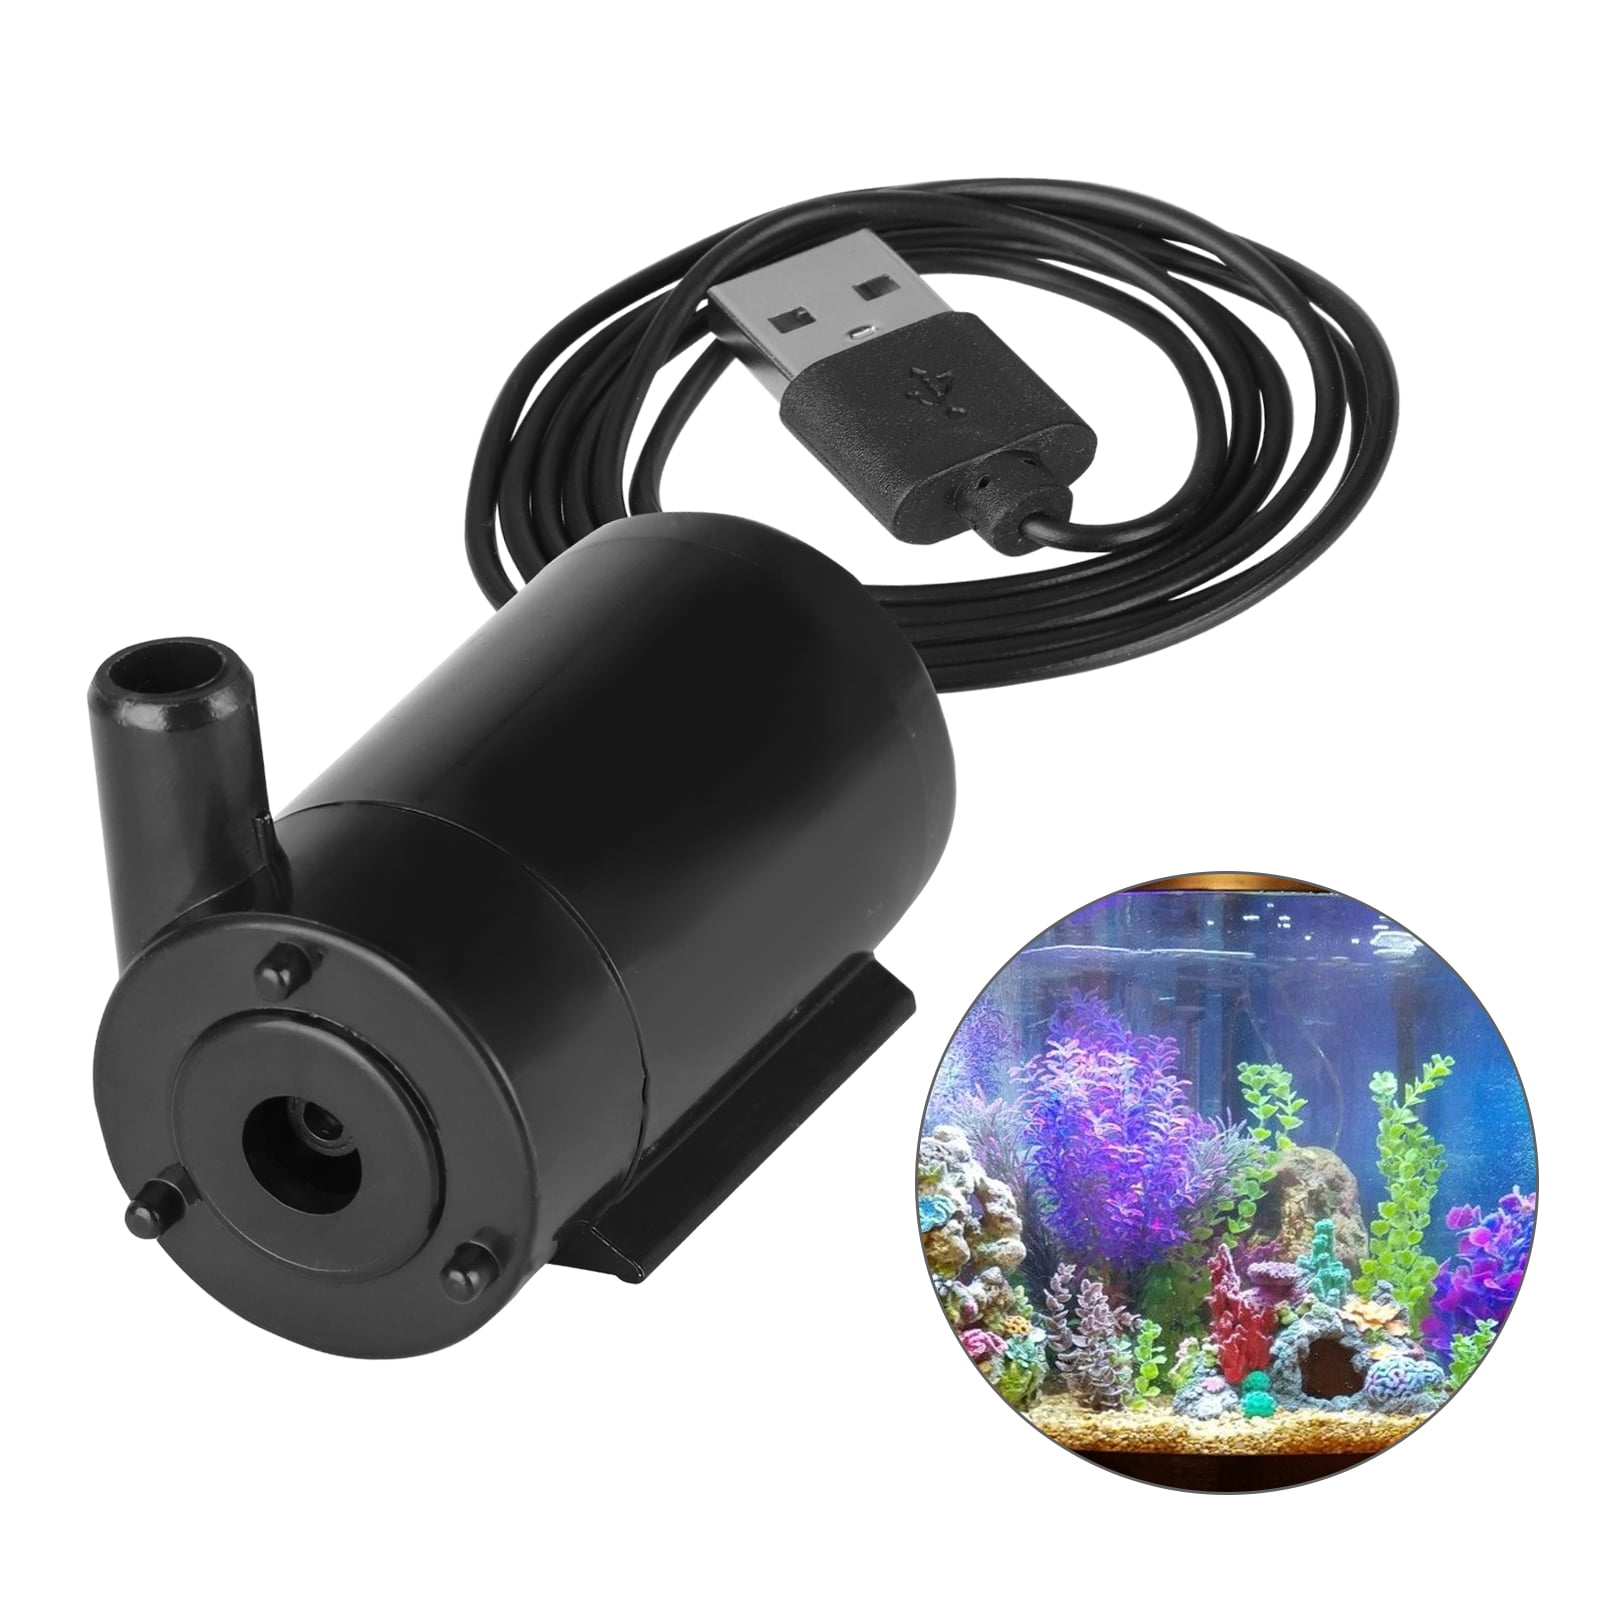 USB Micro Water Pump 3V 3W Dual-Purpose Design With Cable for Fish-Tank Ponds 